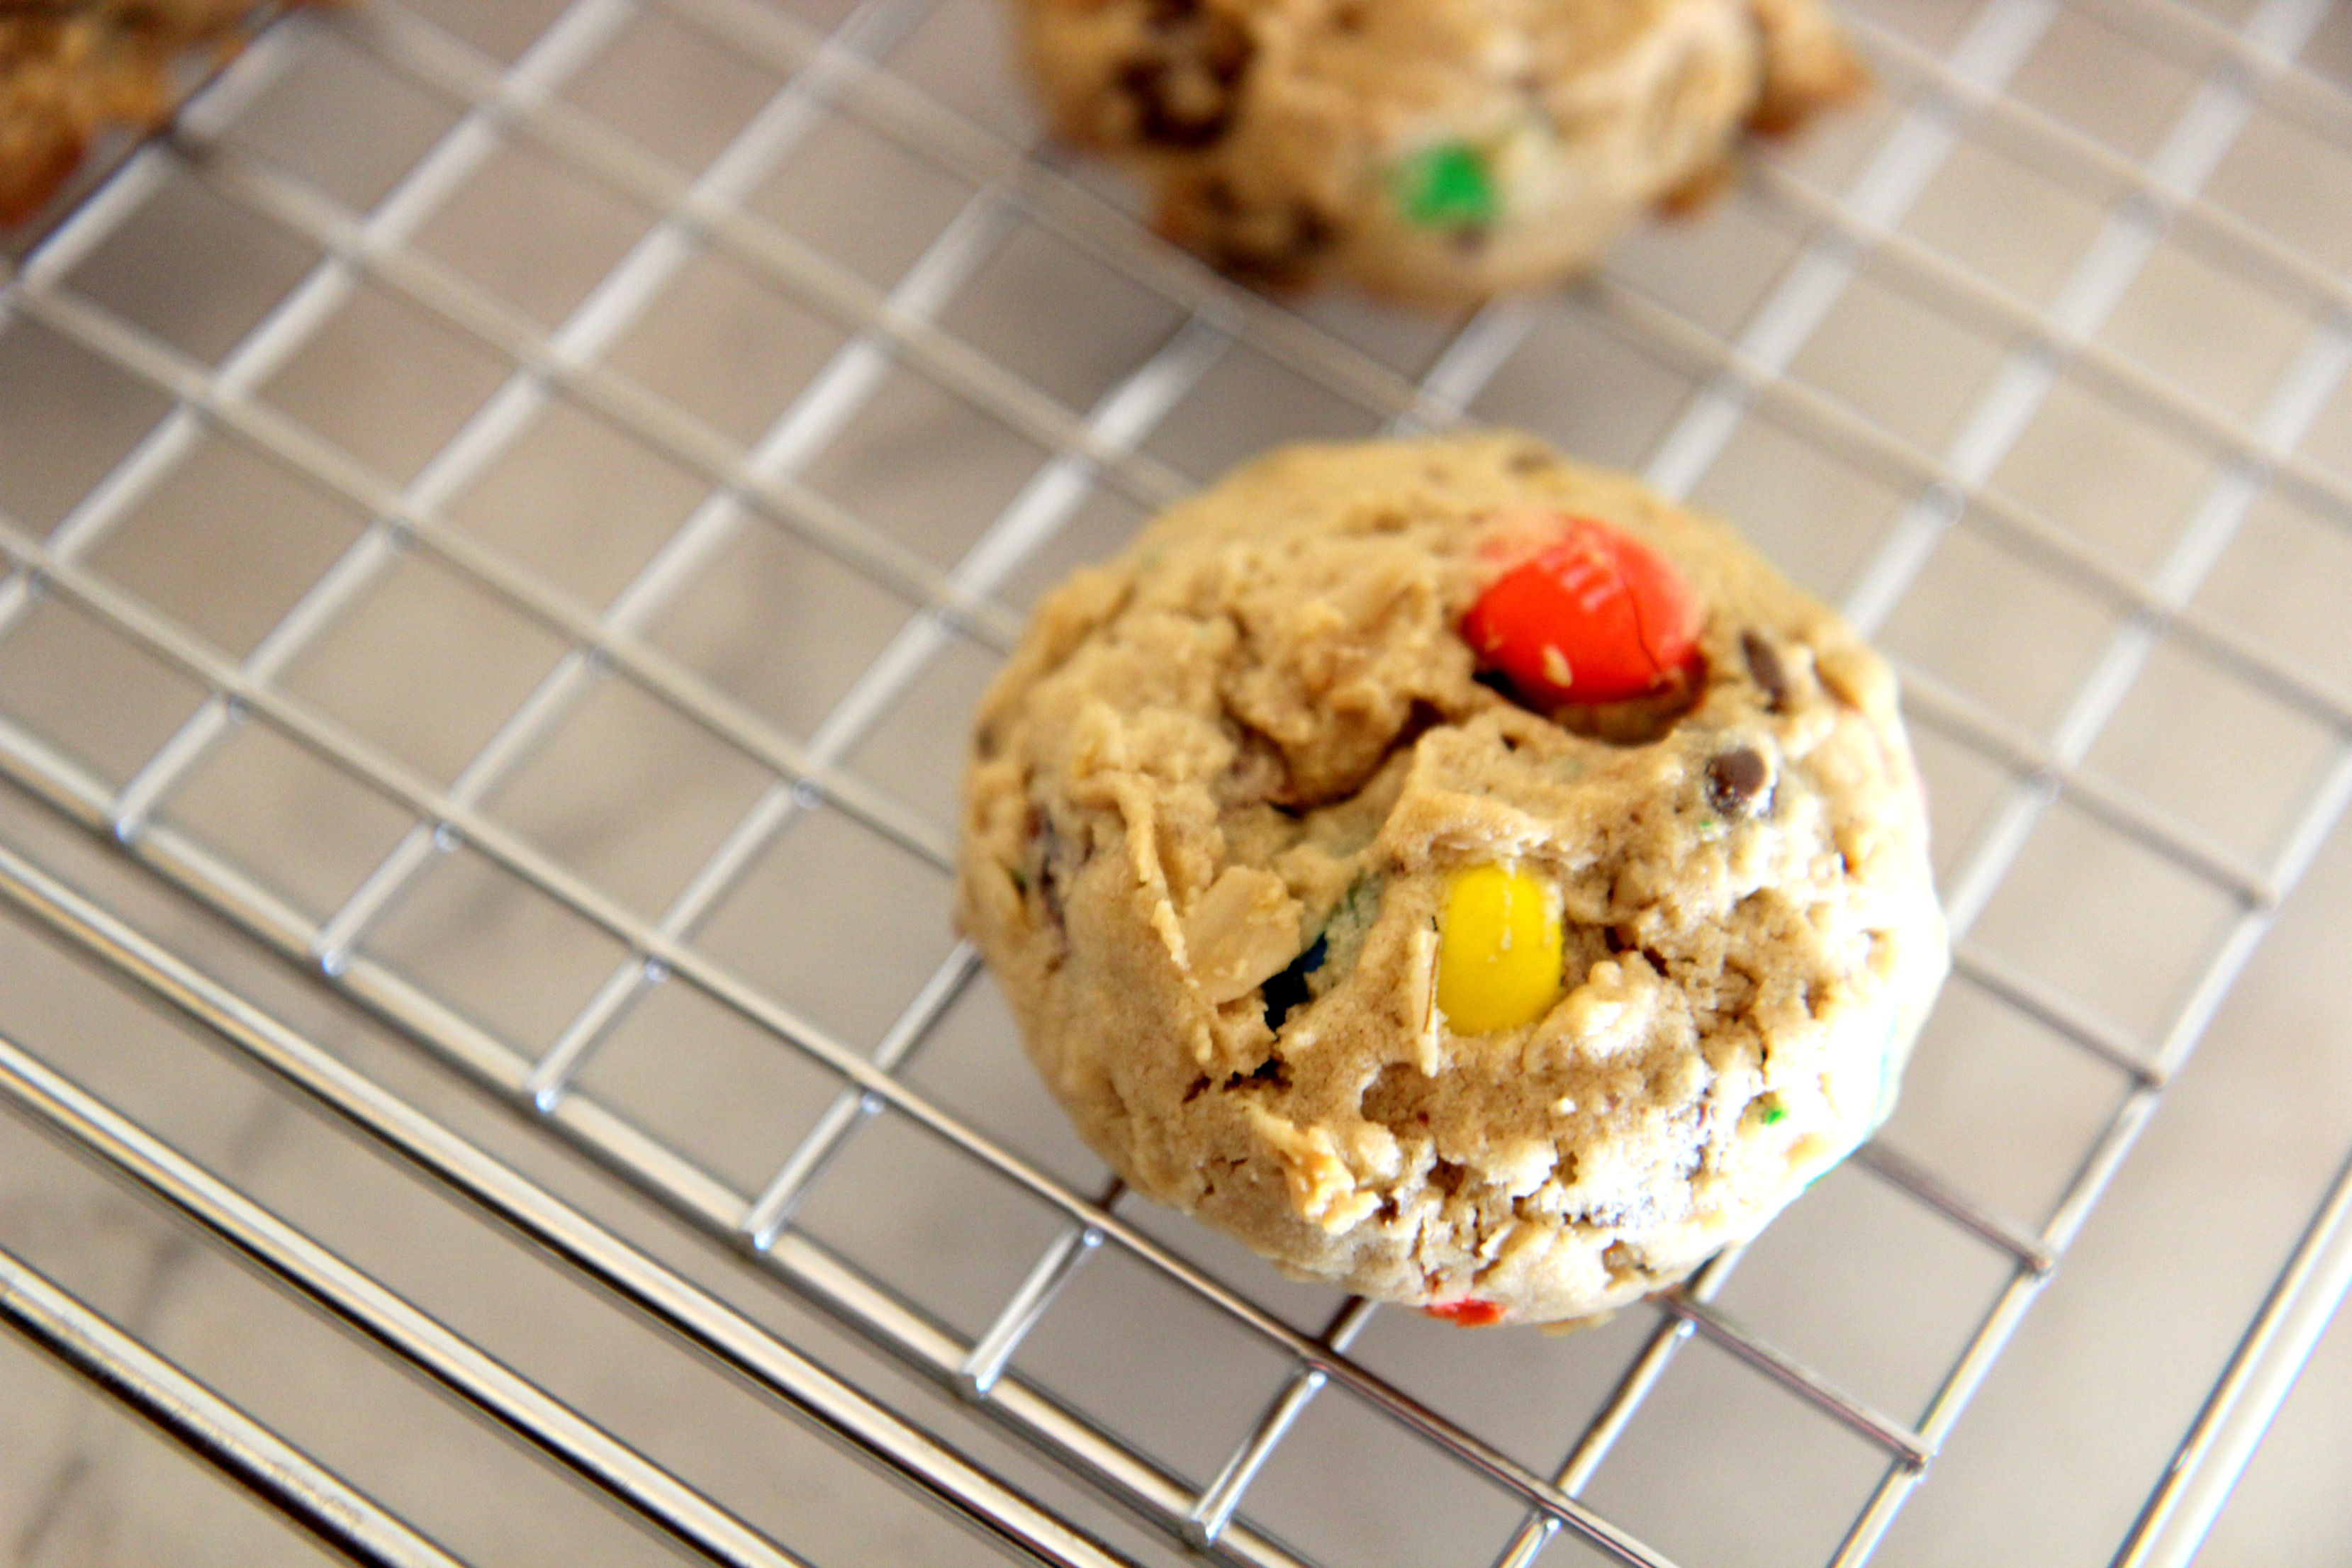 Dip these soft baked monster cookies in some milk for a perfect cookie experience